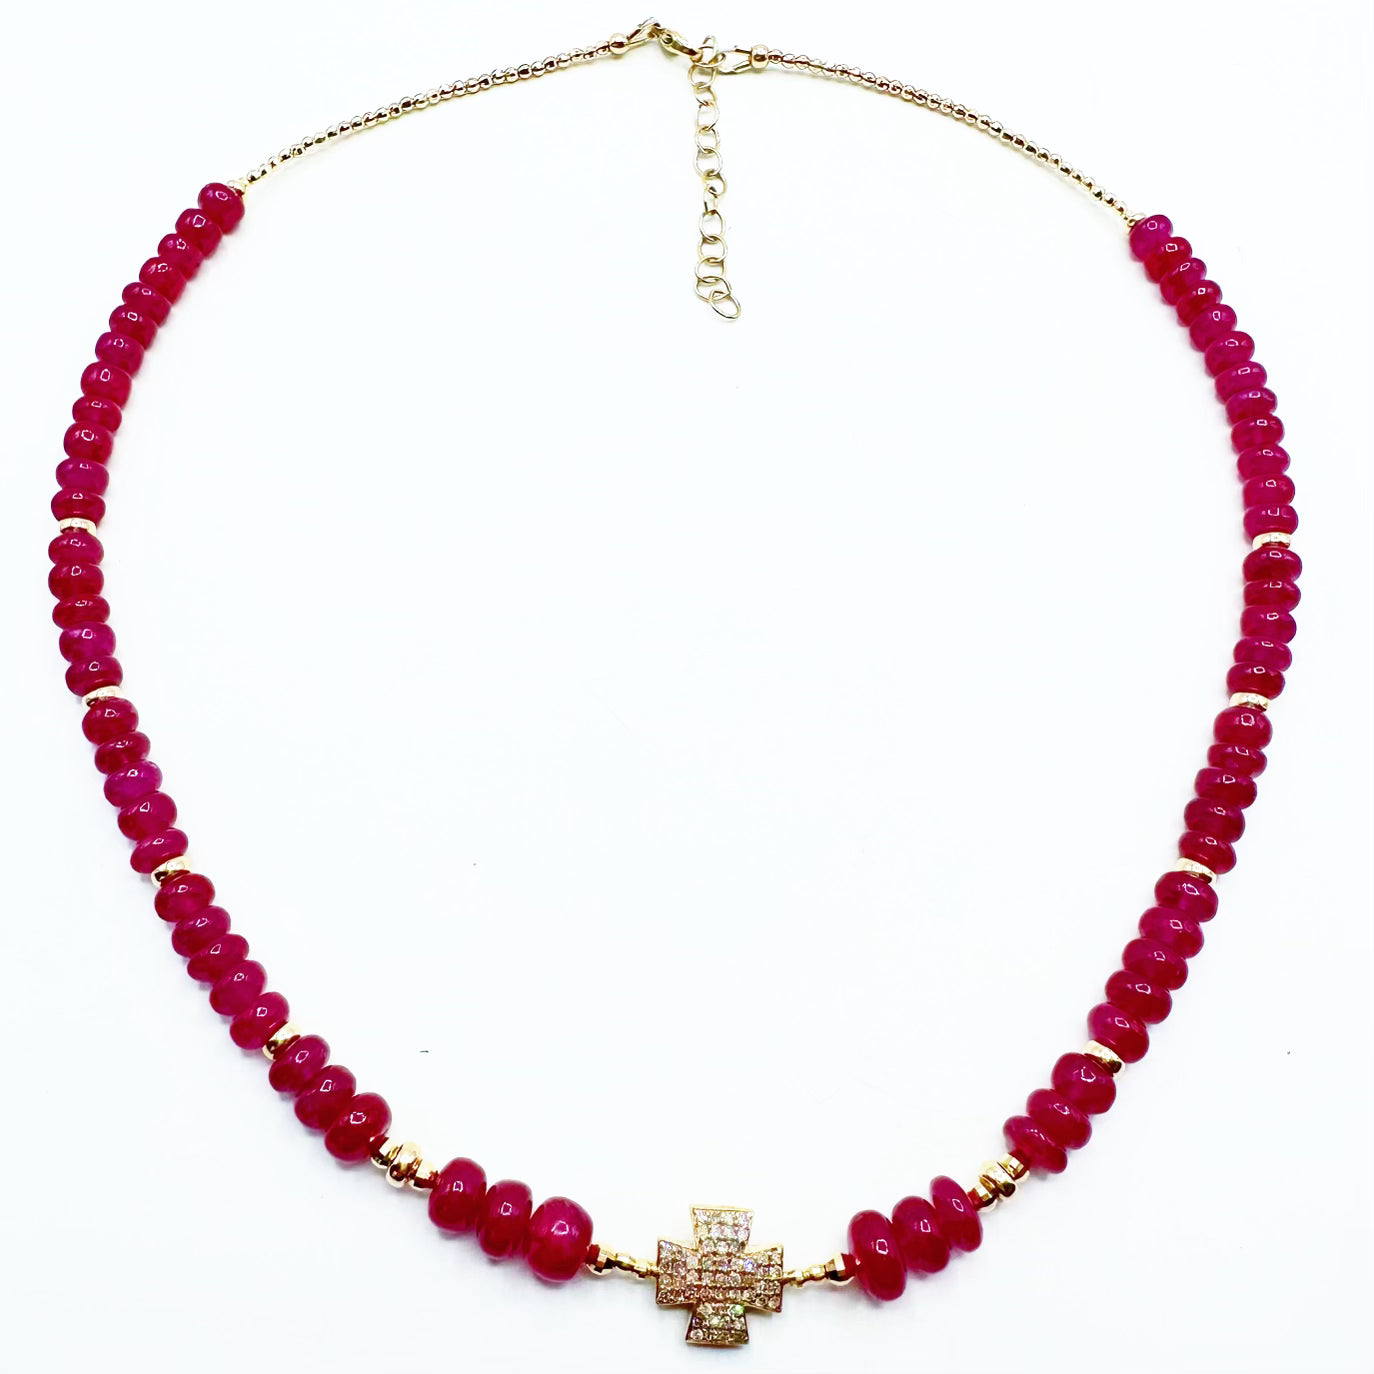 14K GOLD & RUBY NECKLACES. PLAIN STRAND WITH GOLD BEADS OR DIAMON CROSS STYLE